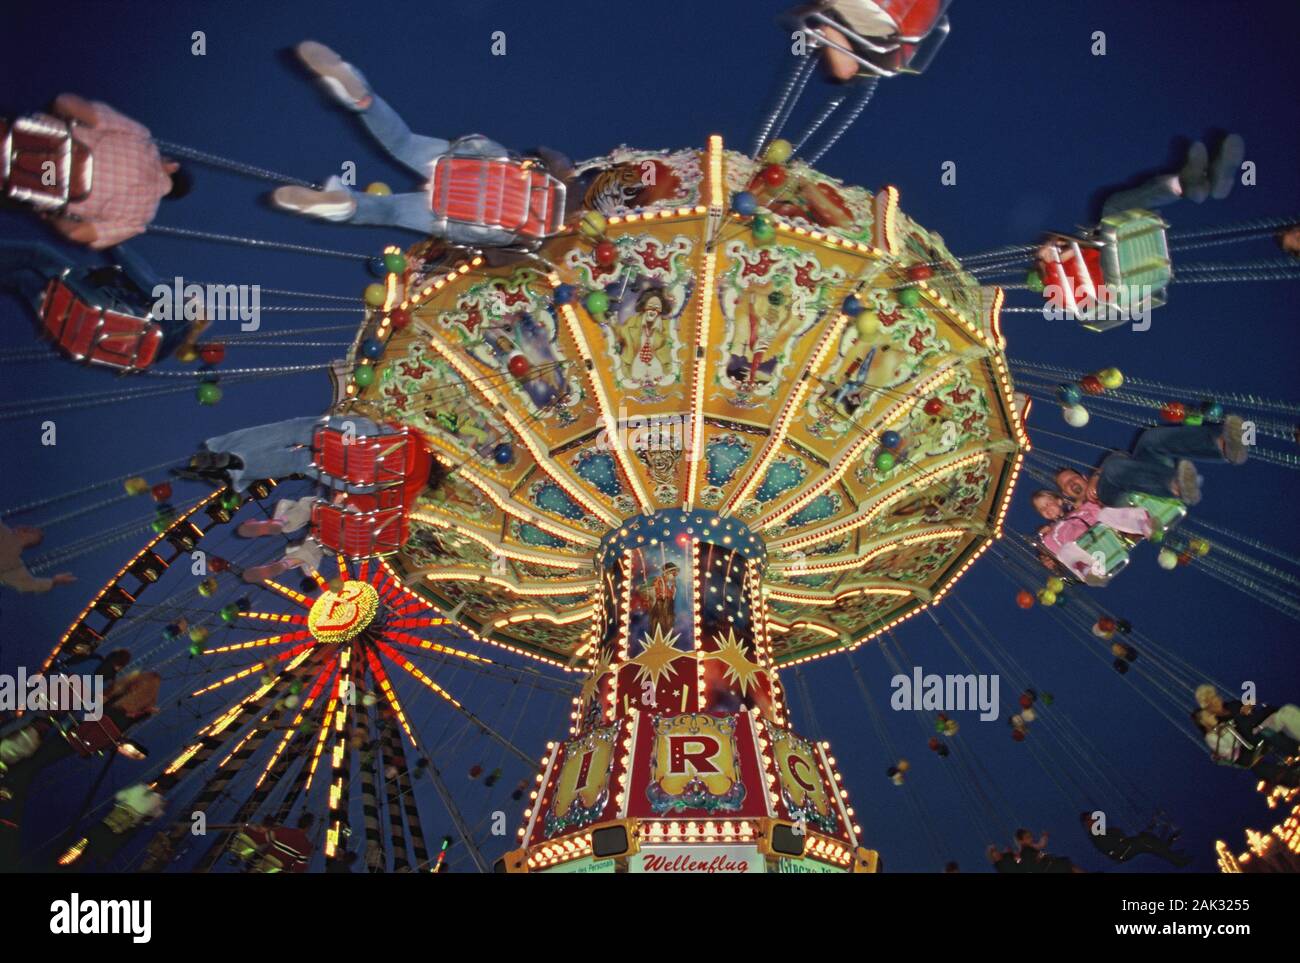 An illuminated chairoplane is spinning round in the dawn at the anually Cranger fair in the city Herne, North Rhine-Westphalia, Germany. (Undated pict Stock Photo